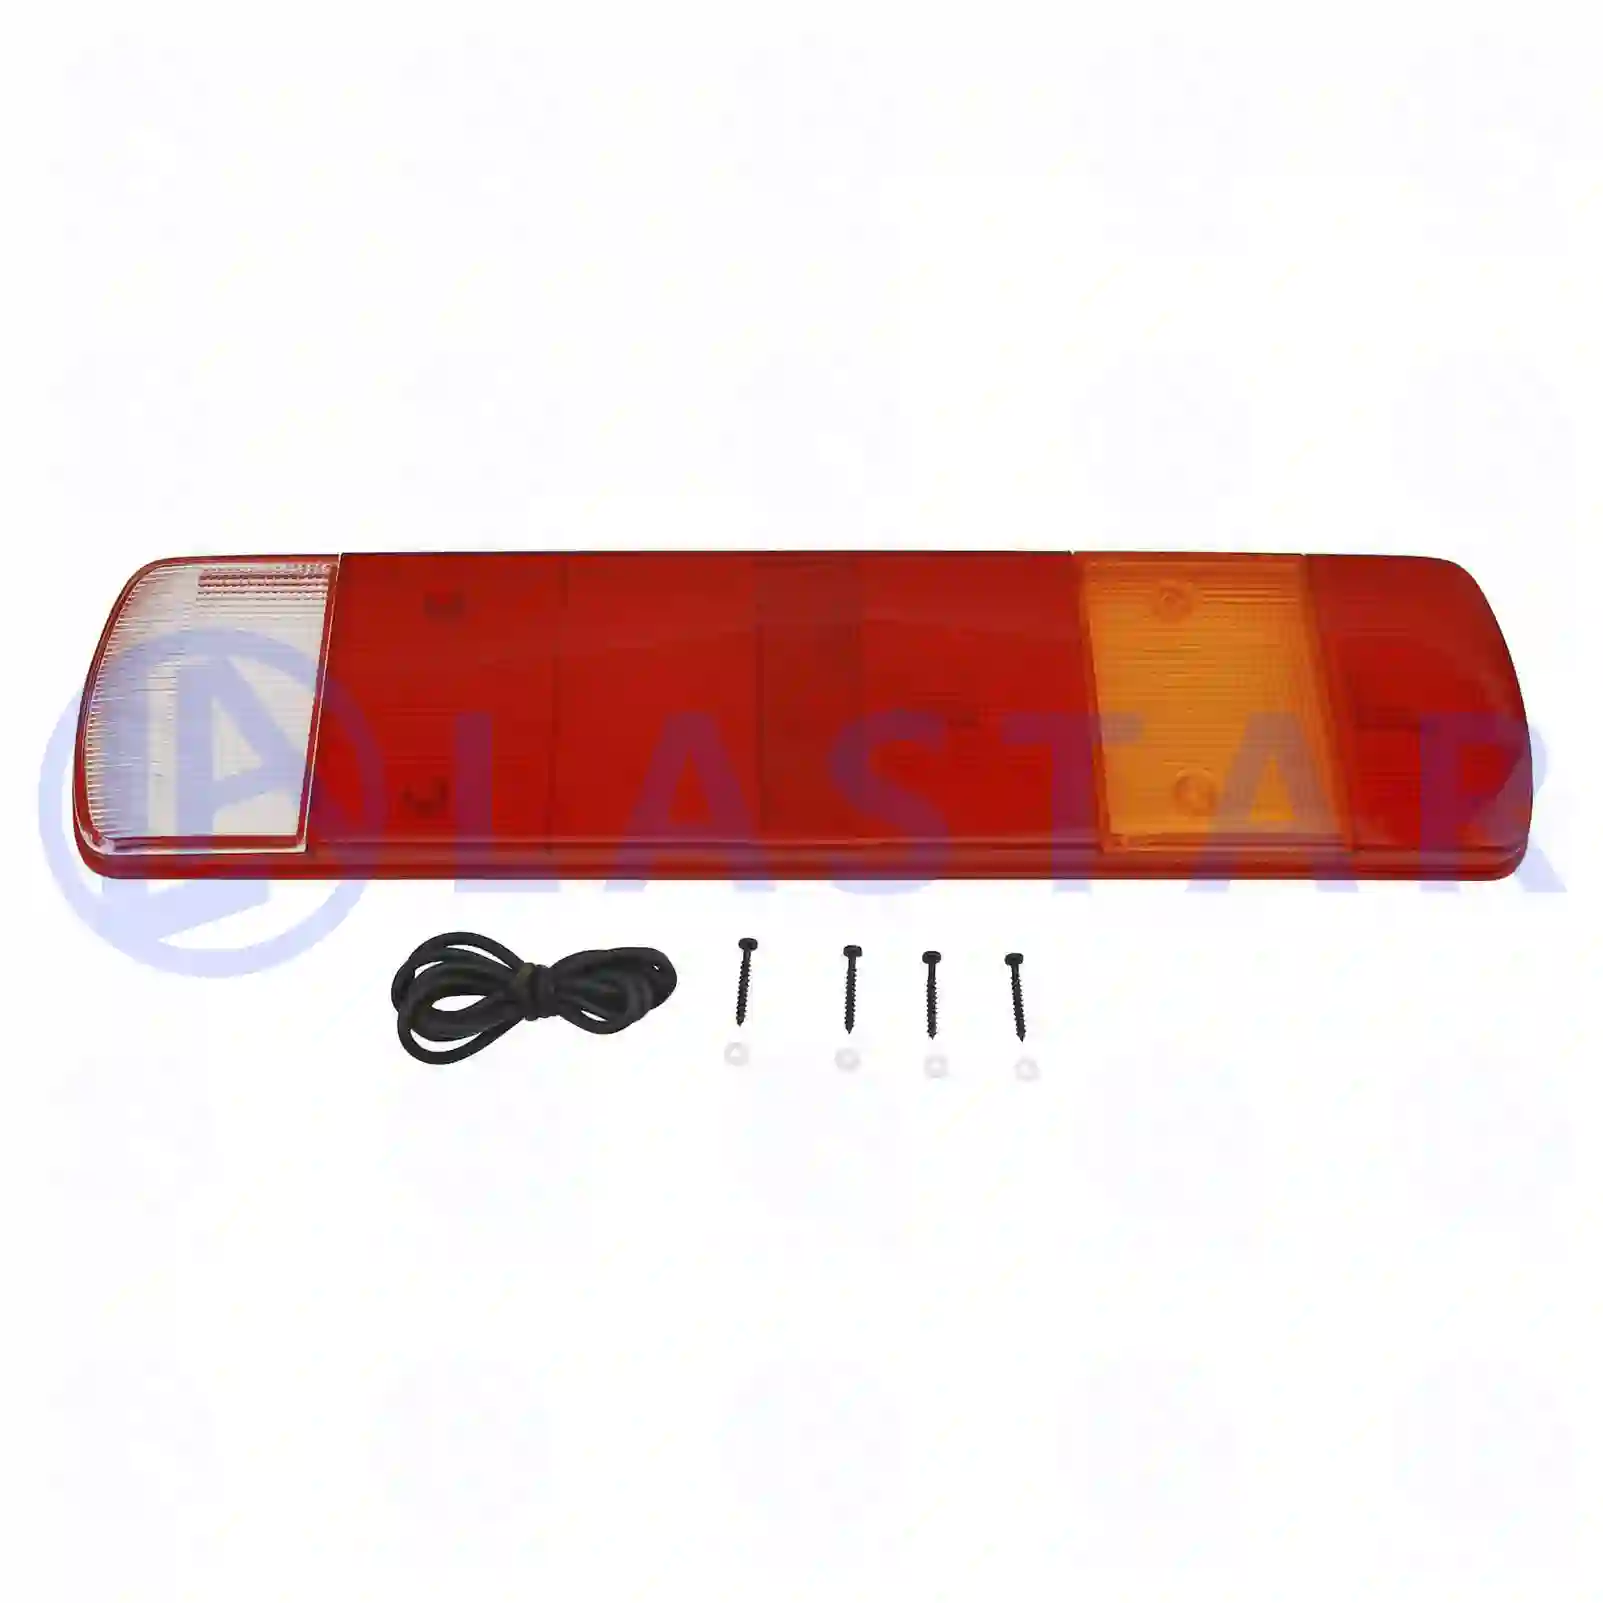 Tail lamp glass, 77711040, 1524795, 1380819, 3981782, ZG21073-0008 ||  77711040 Lastar Spare Part | Truck Spare Parts, Auotomotive Spare Parts Tail lamp glass, 77711040, 1524795, 1380819, 3981782, ZG21073-0008 ||  77711040 Lastar Spare Part | Truck Spare Parts, Auotomotive Spare Parts